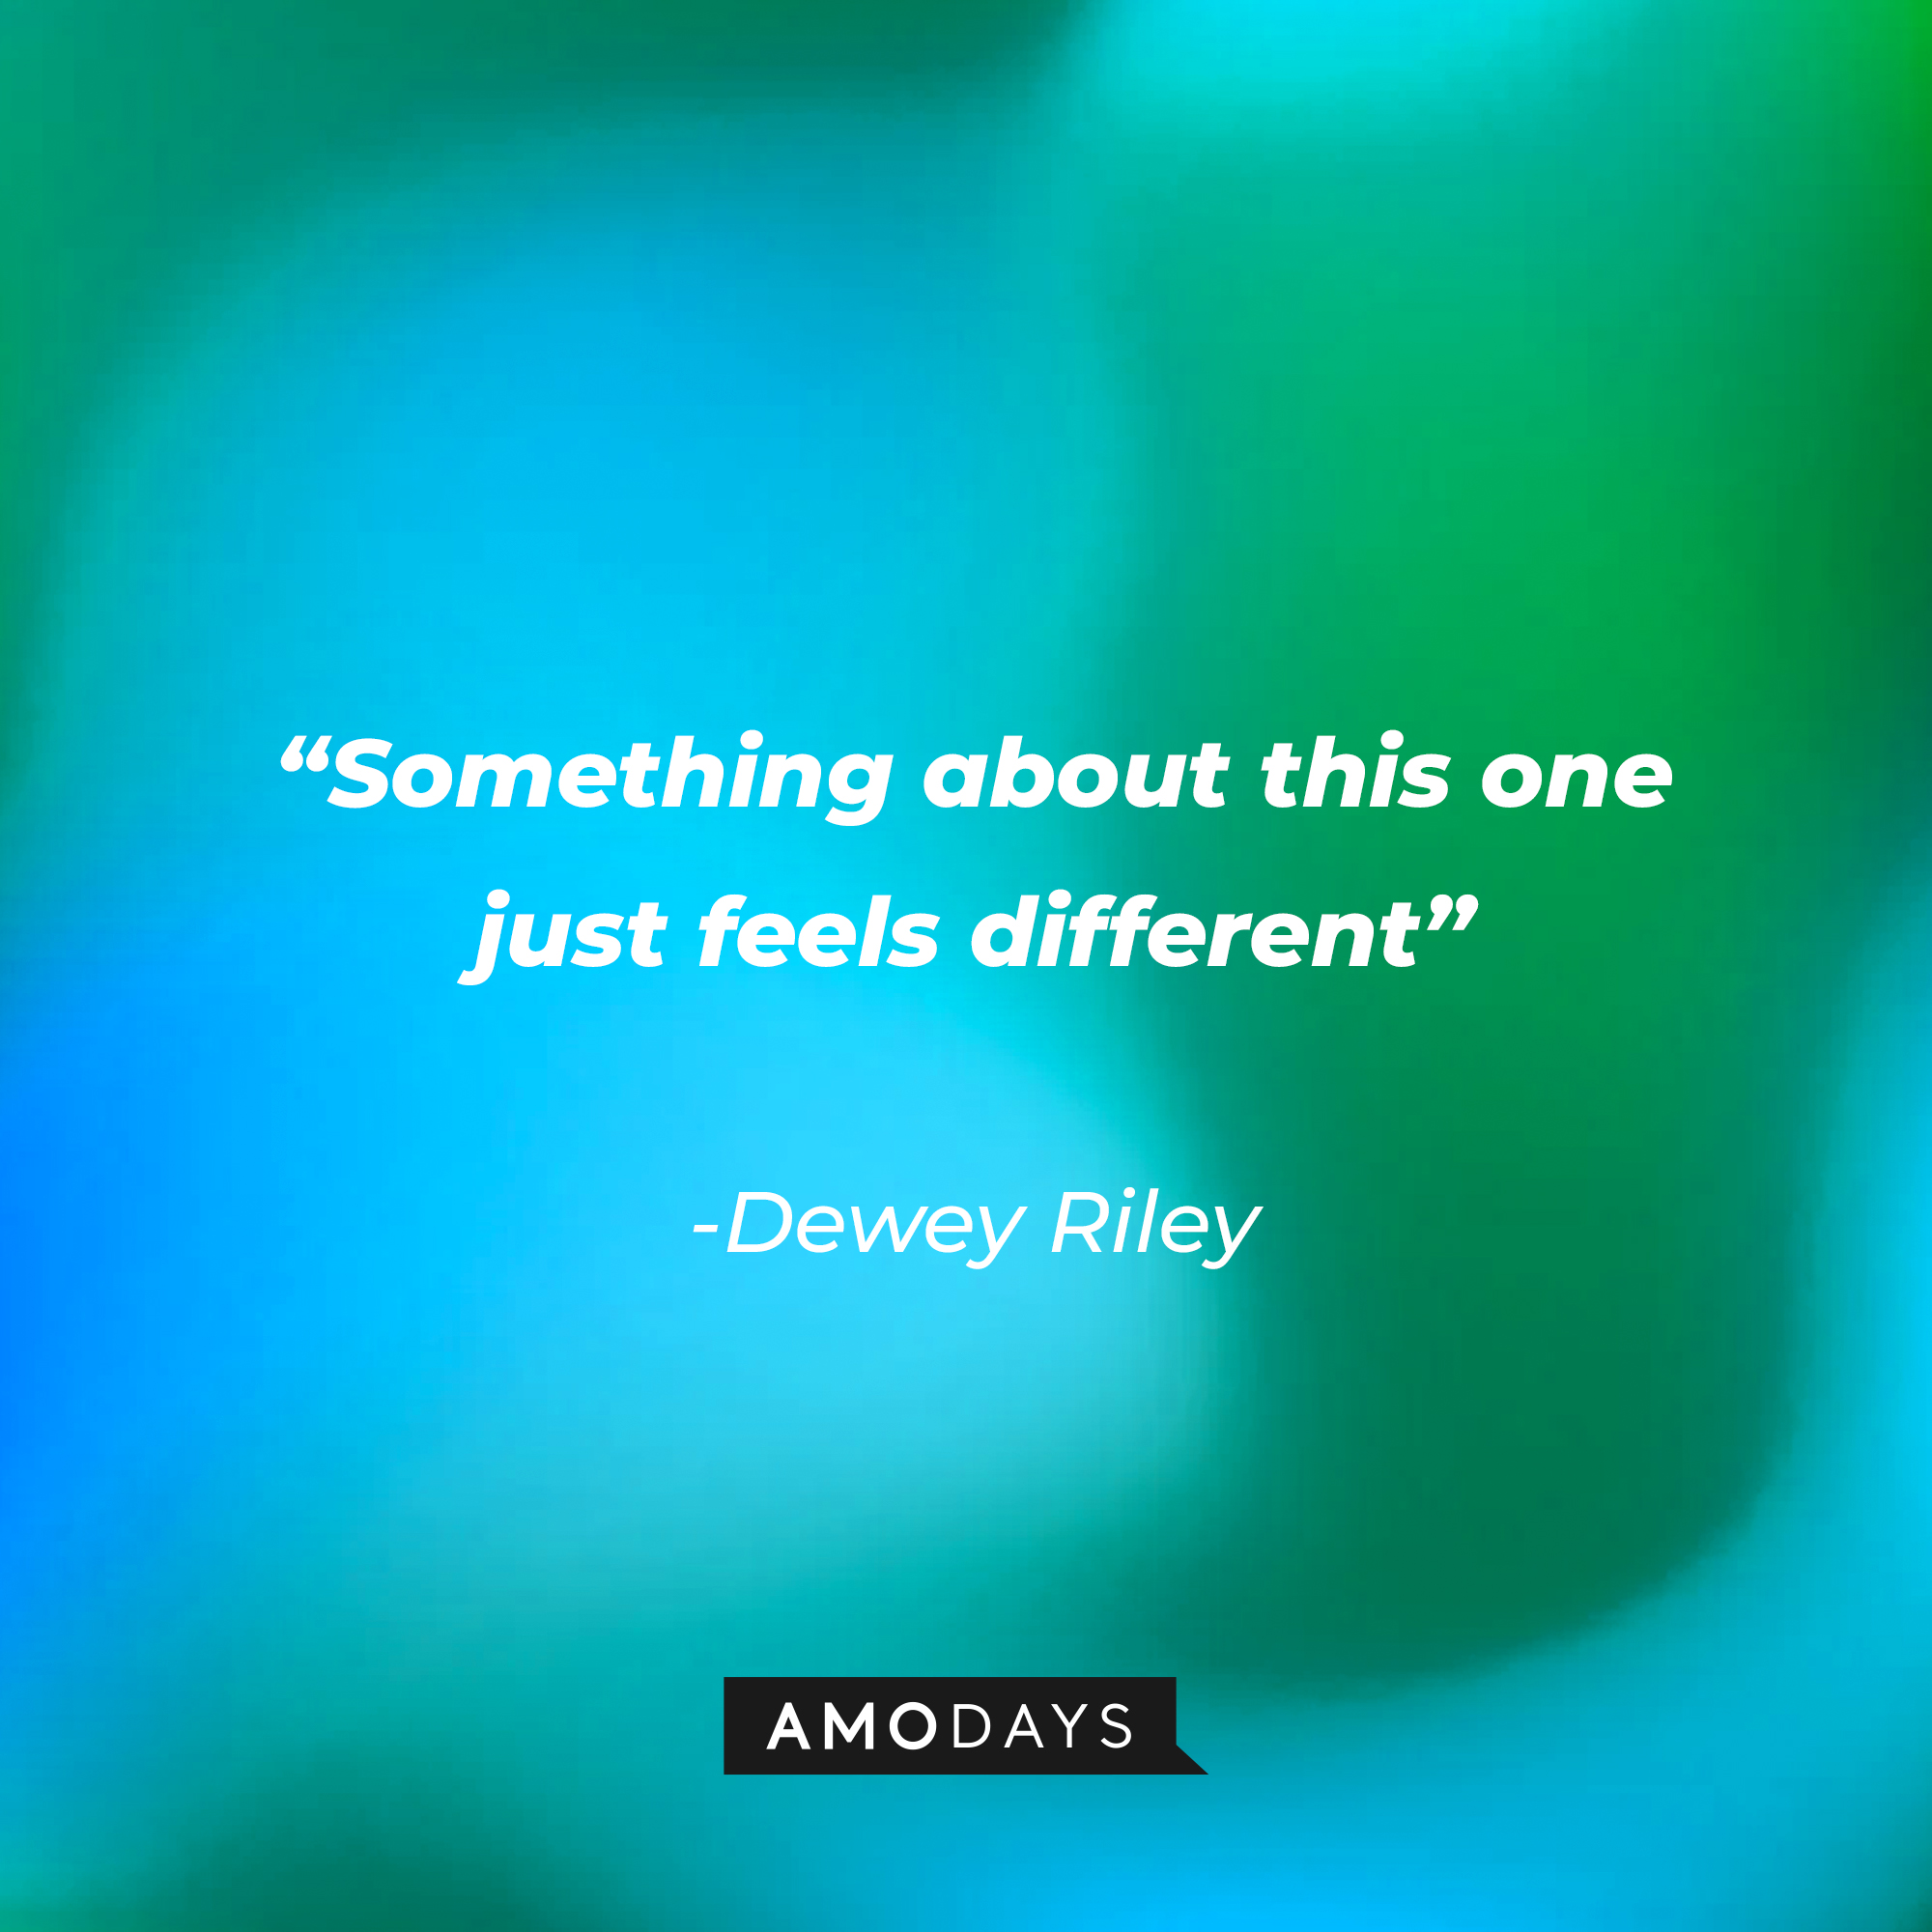 Dewey Riley’s quote from “Scream ‘(2020)’”: “Something about this one just feels different." | Source: AmoDays